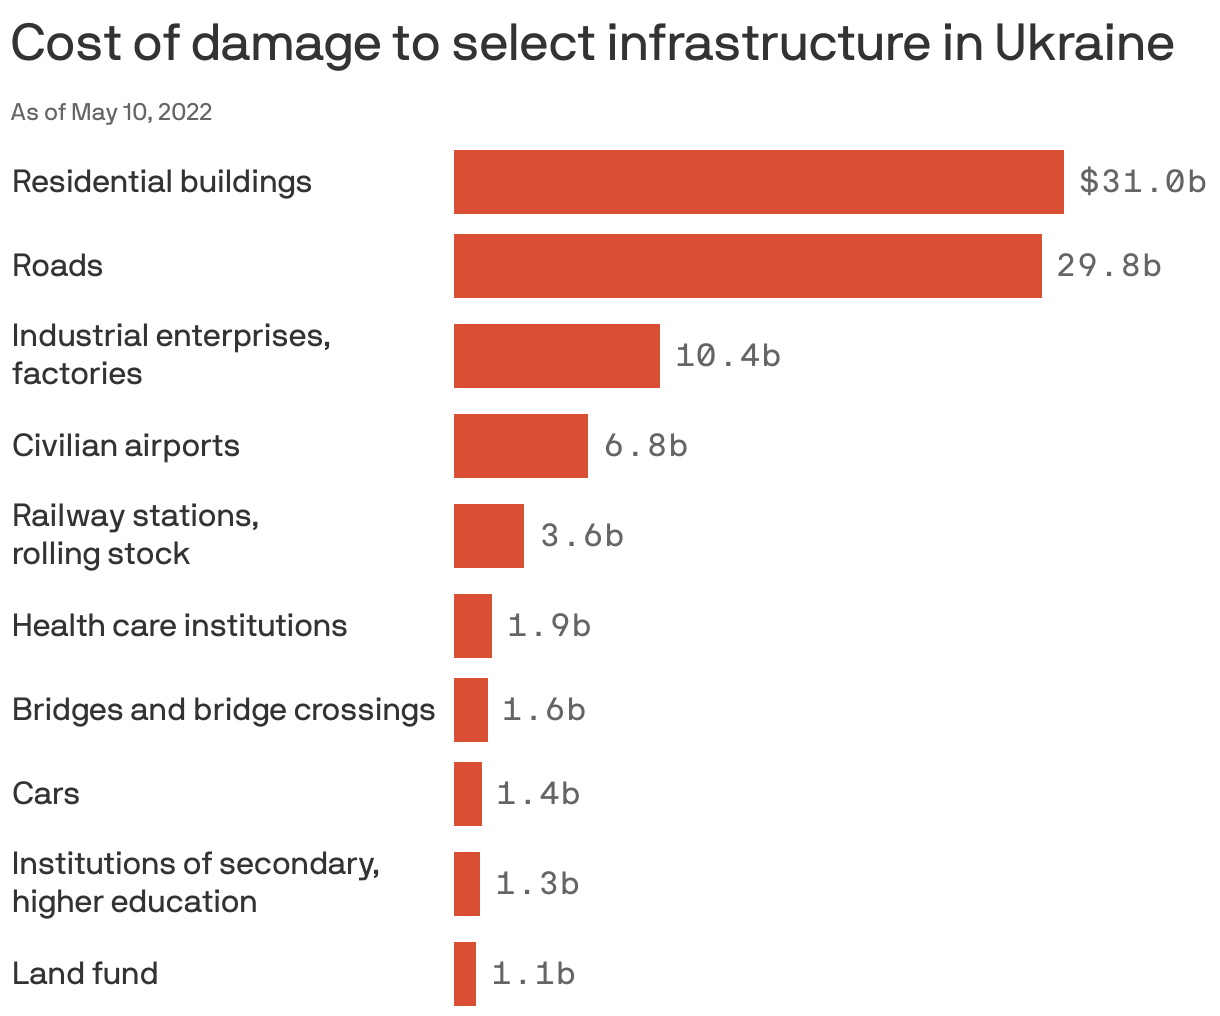 Cost of damage to select infrastructure in Ukraine
